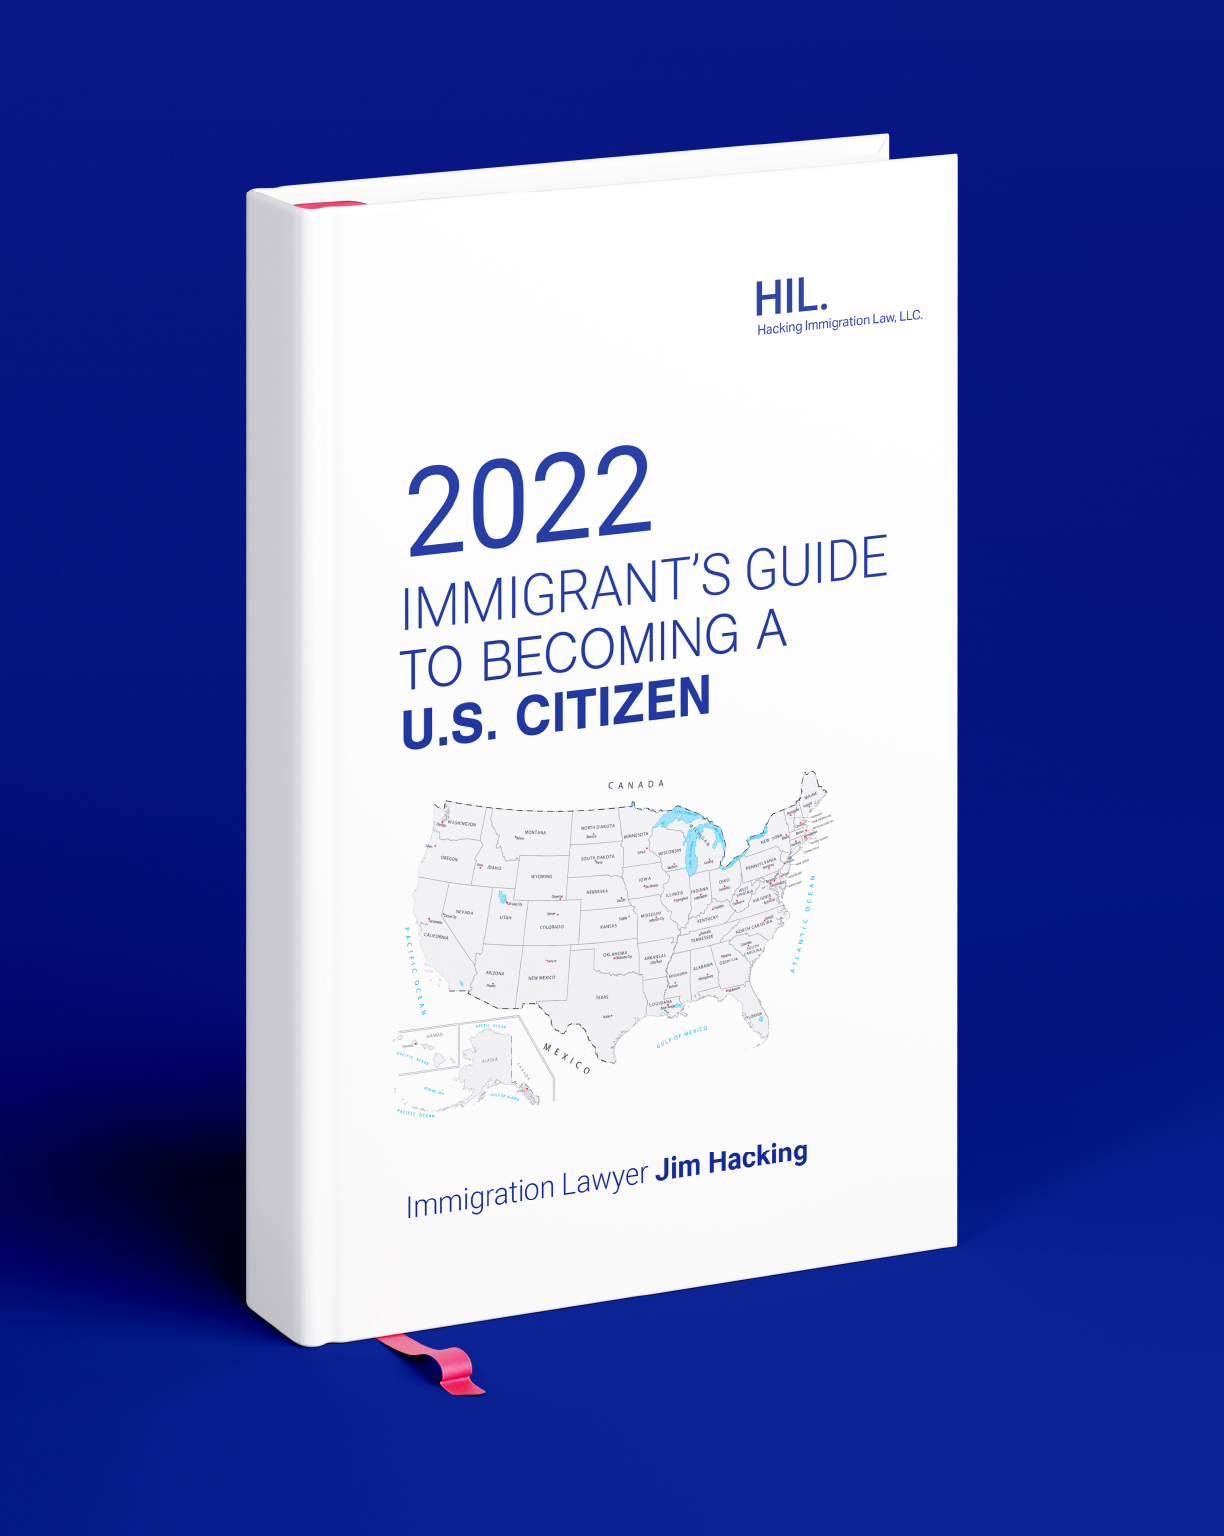 2022 Immigrant’s Guide to Becoming U.S. Citizen